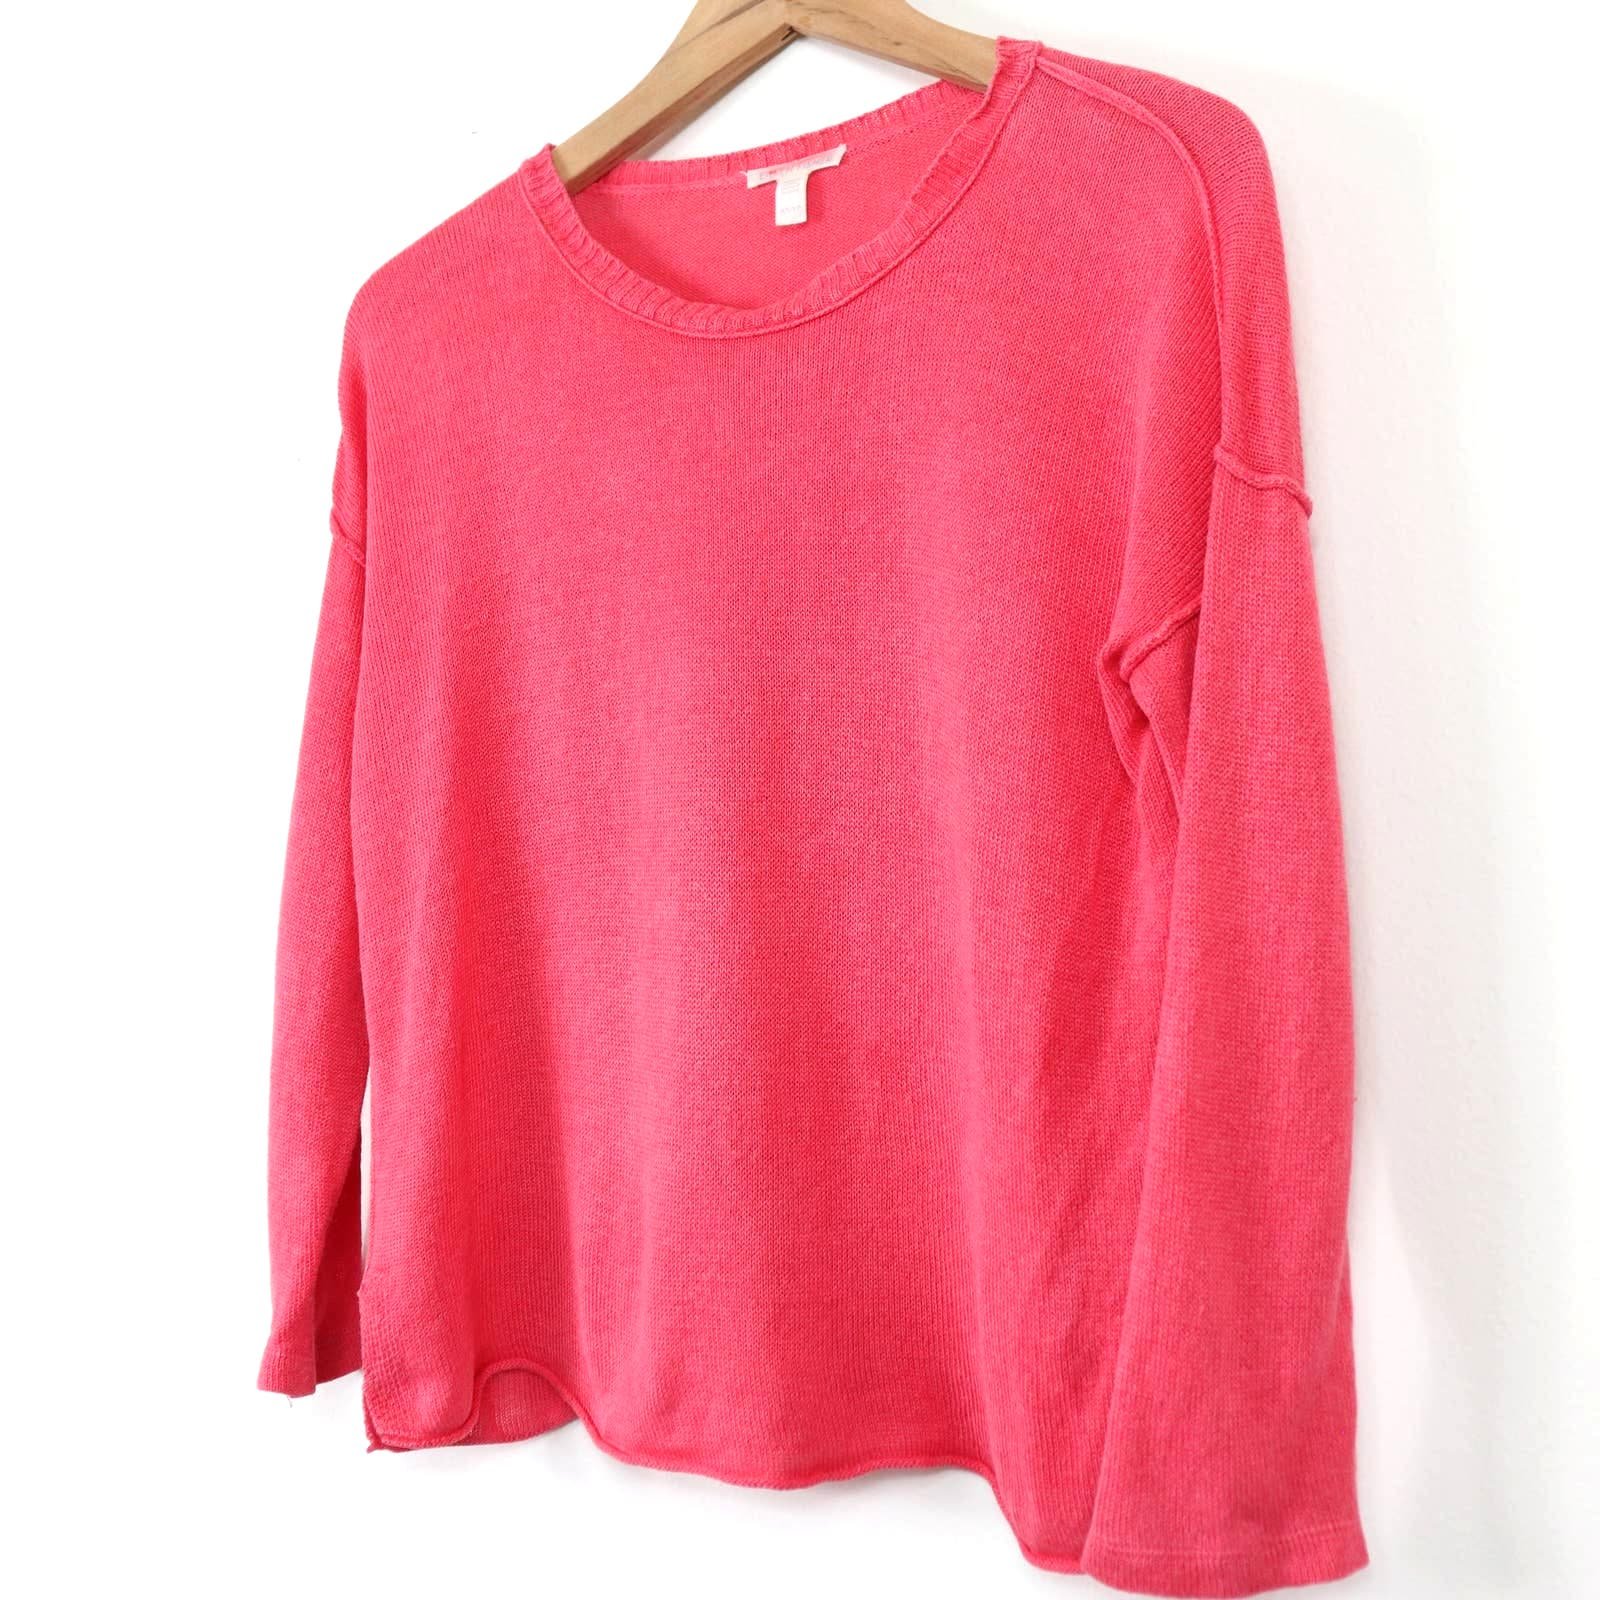 Amazing Eileen Fisher Size XS Boxy Crop Top 3/4 Sleeve Outward Seams Linen Coral Orange JwxQqFOvC Low Price